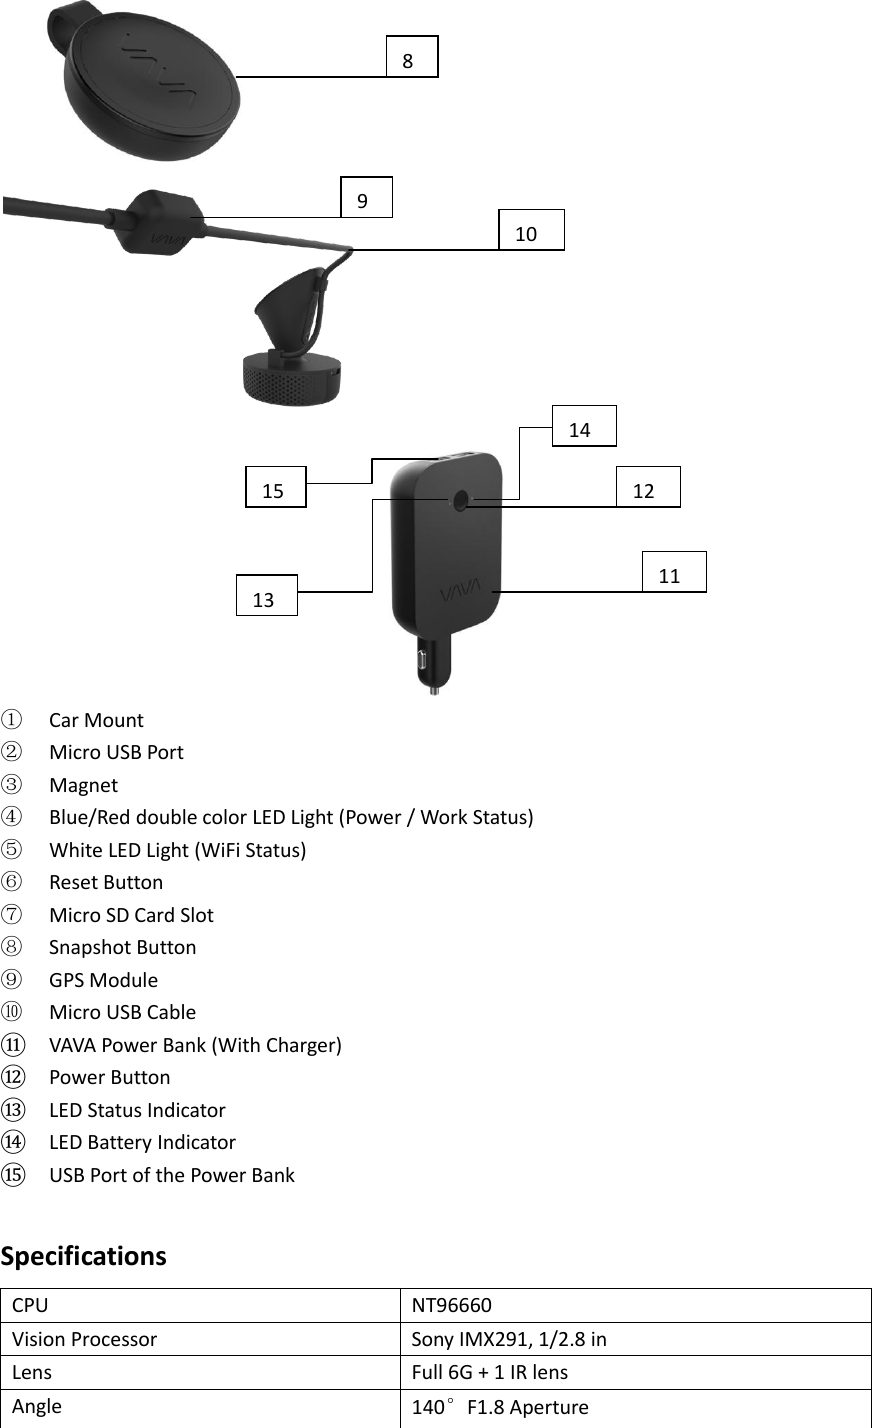    ①   Car Mount ②   Micro USB Port ③   Magnet ④   Blue/Red double color LED Light (Power / Work Status) ⑤   White LED Light (WiFi Status) ⑥   Reset Button ⑦   Micro SD Card Slot ⑧   Snapshot Button ⑨   GPS Module ⑩   Micro USB Cable ⑪   VAVA Power Bank (With Charger) ⑫   Power Button ⑬   LED Status Indicator ⑭   LED Battery Indicator ⑮   USB Port of the Power Bank  Specifications   CPU   NT96660   Vision Processor Sony IMX291, 1/2.8 in Lens   Full 6G + 1 IR lens   Angle   140°F1.8 Aperture   8 9 11 10 12 13 14 15 